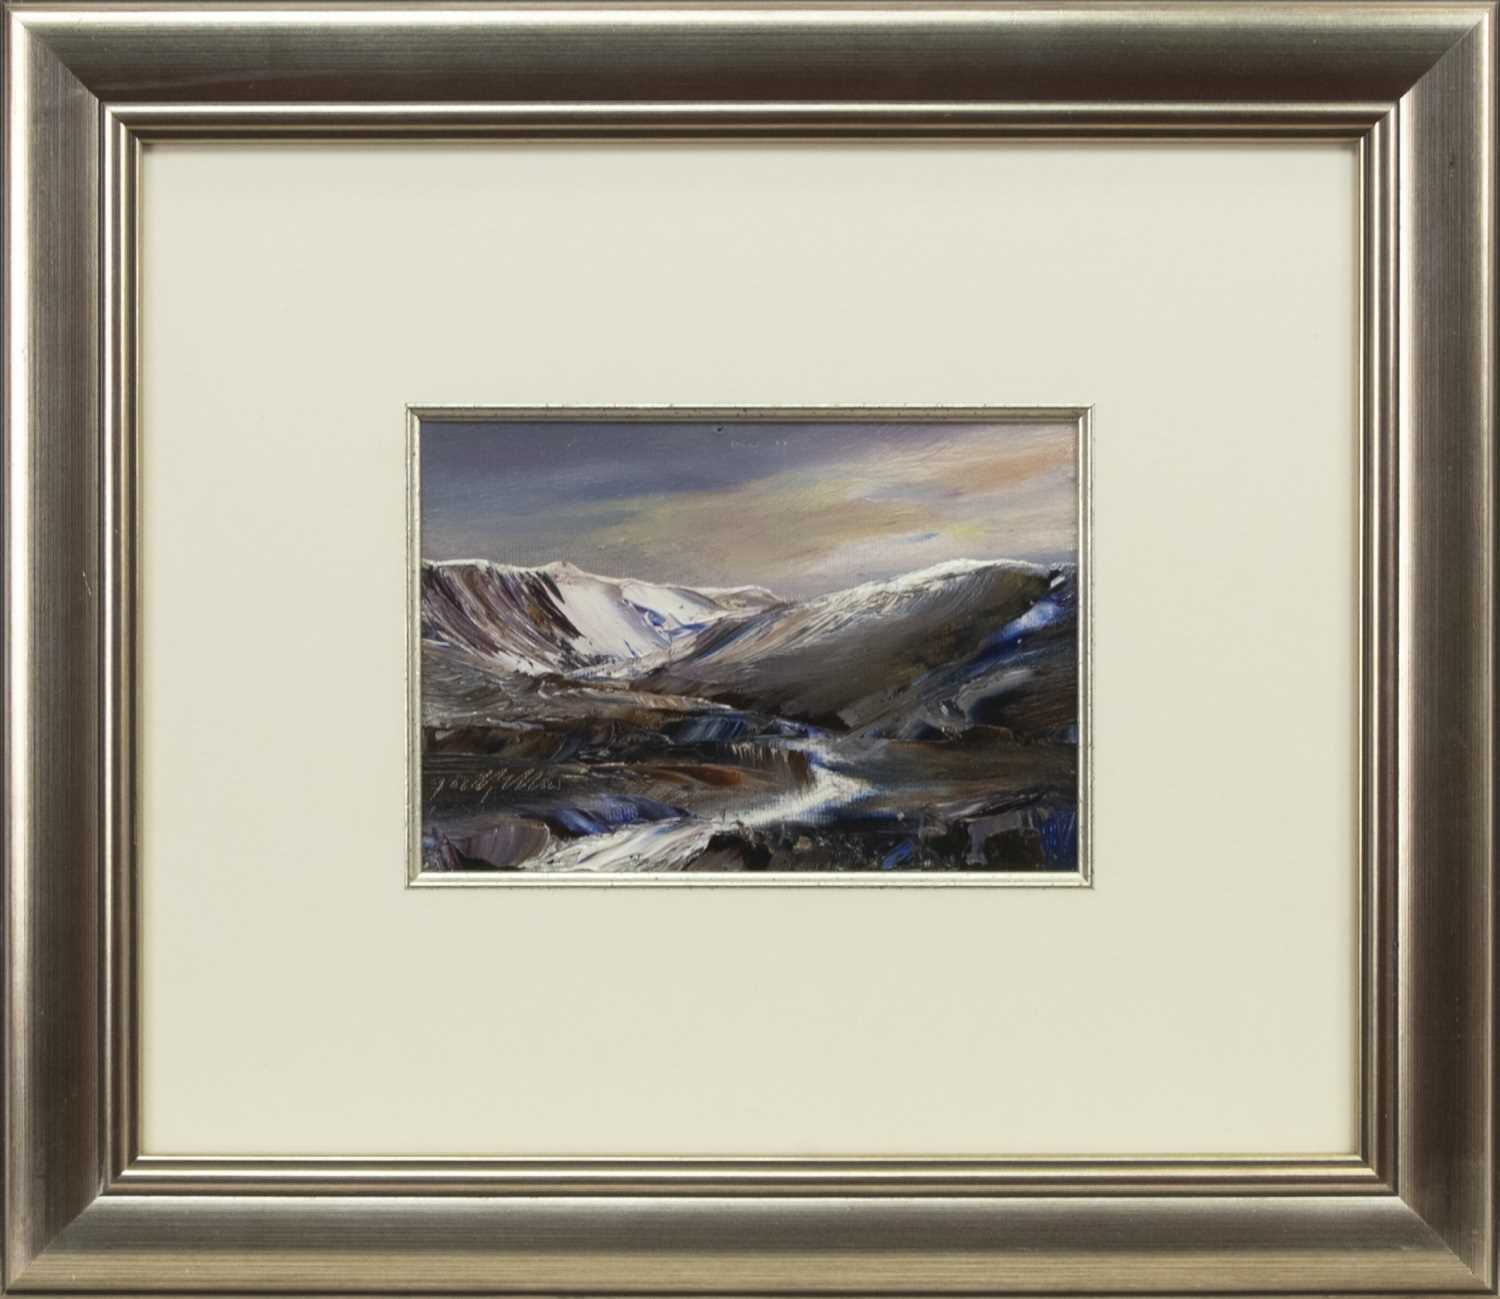 Lot 580 - THE MELTING SNOW, AN OIL BY PETER GOODFELLOW